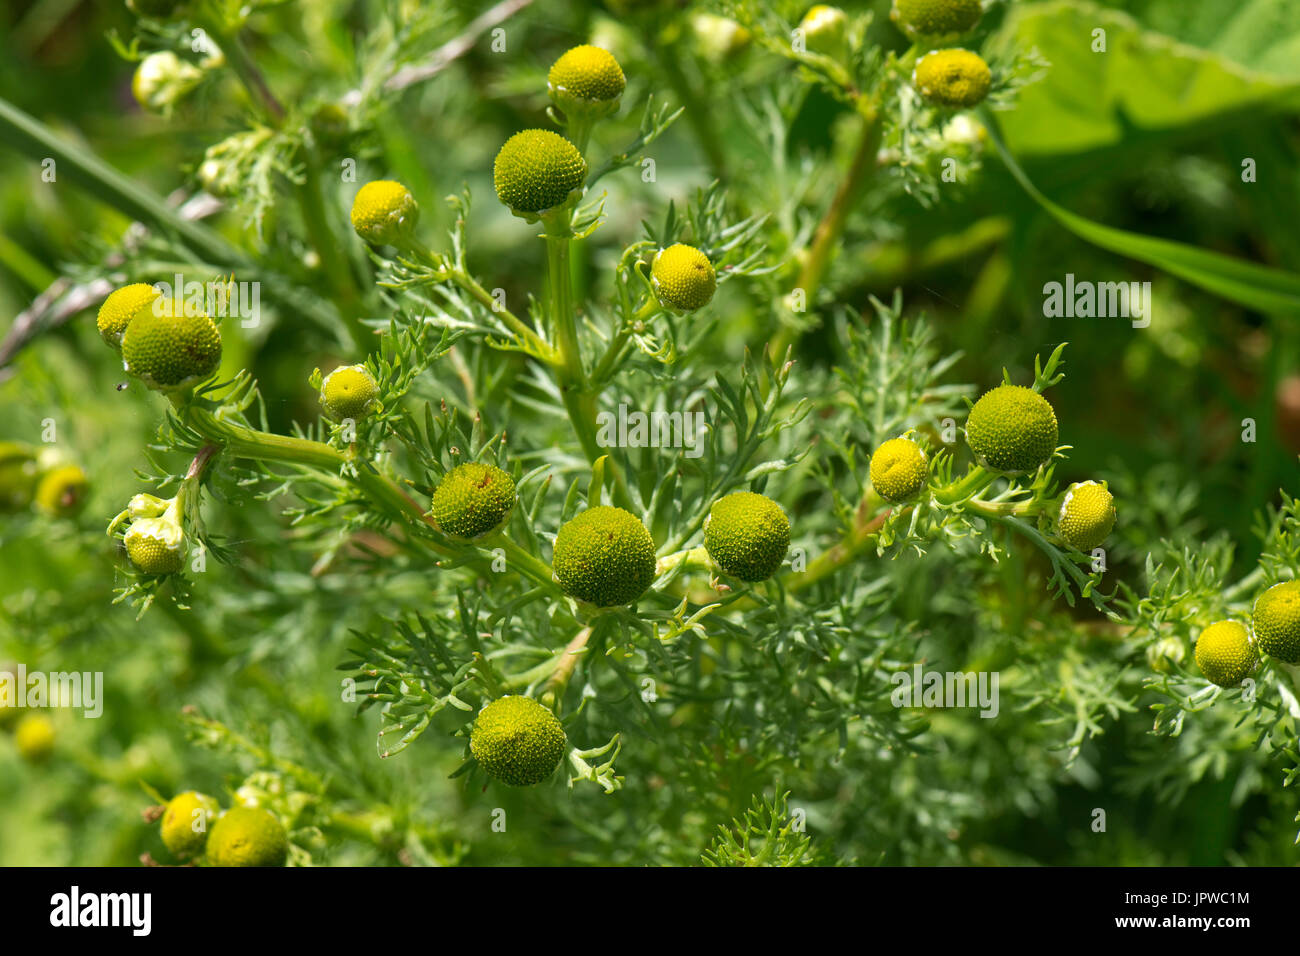 Pineappleweed or wild chamomile, Maricaria discoidea, rayless flowers and leaves, Berkshire, June Stock Photo